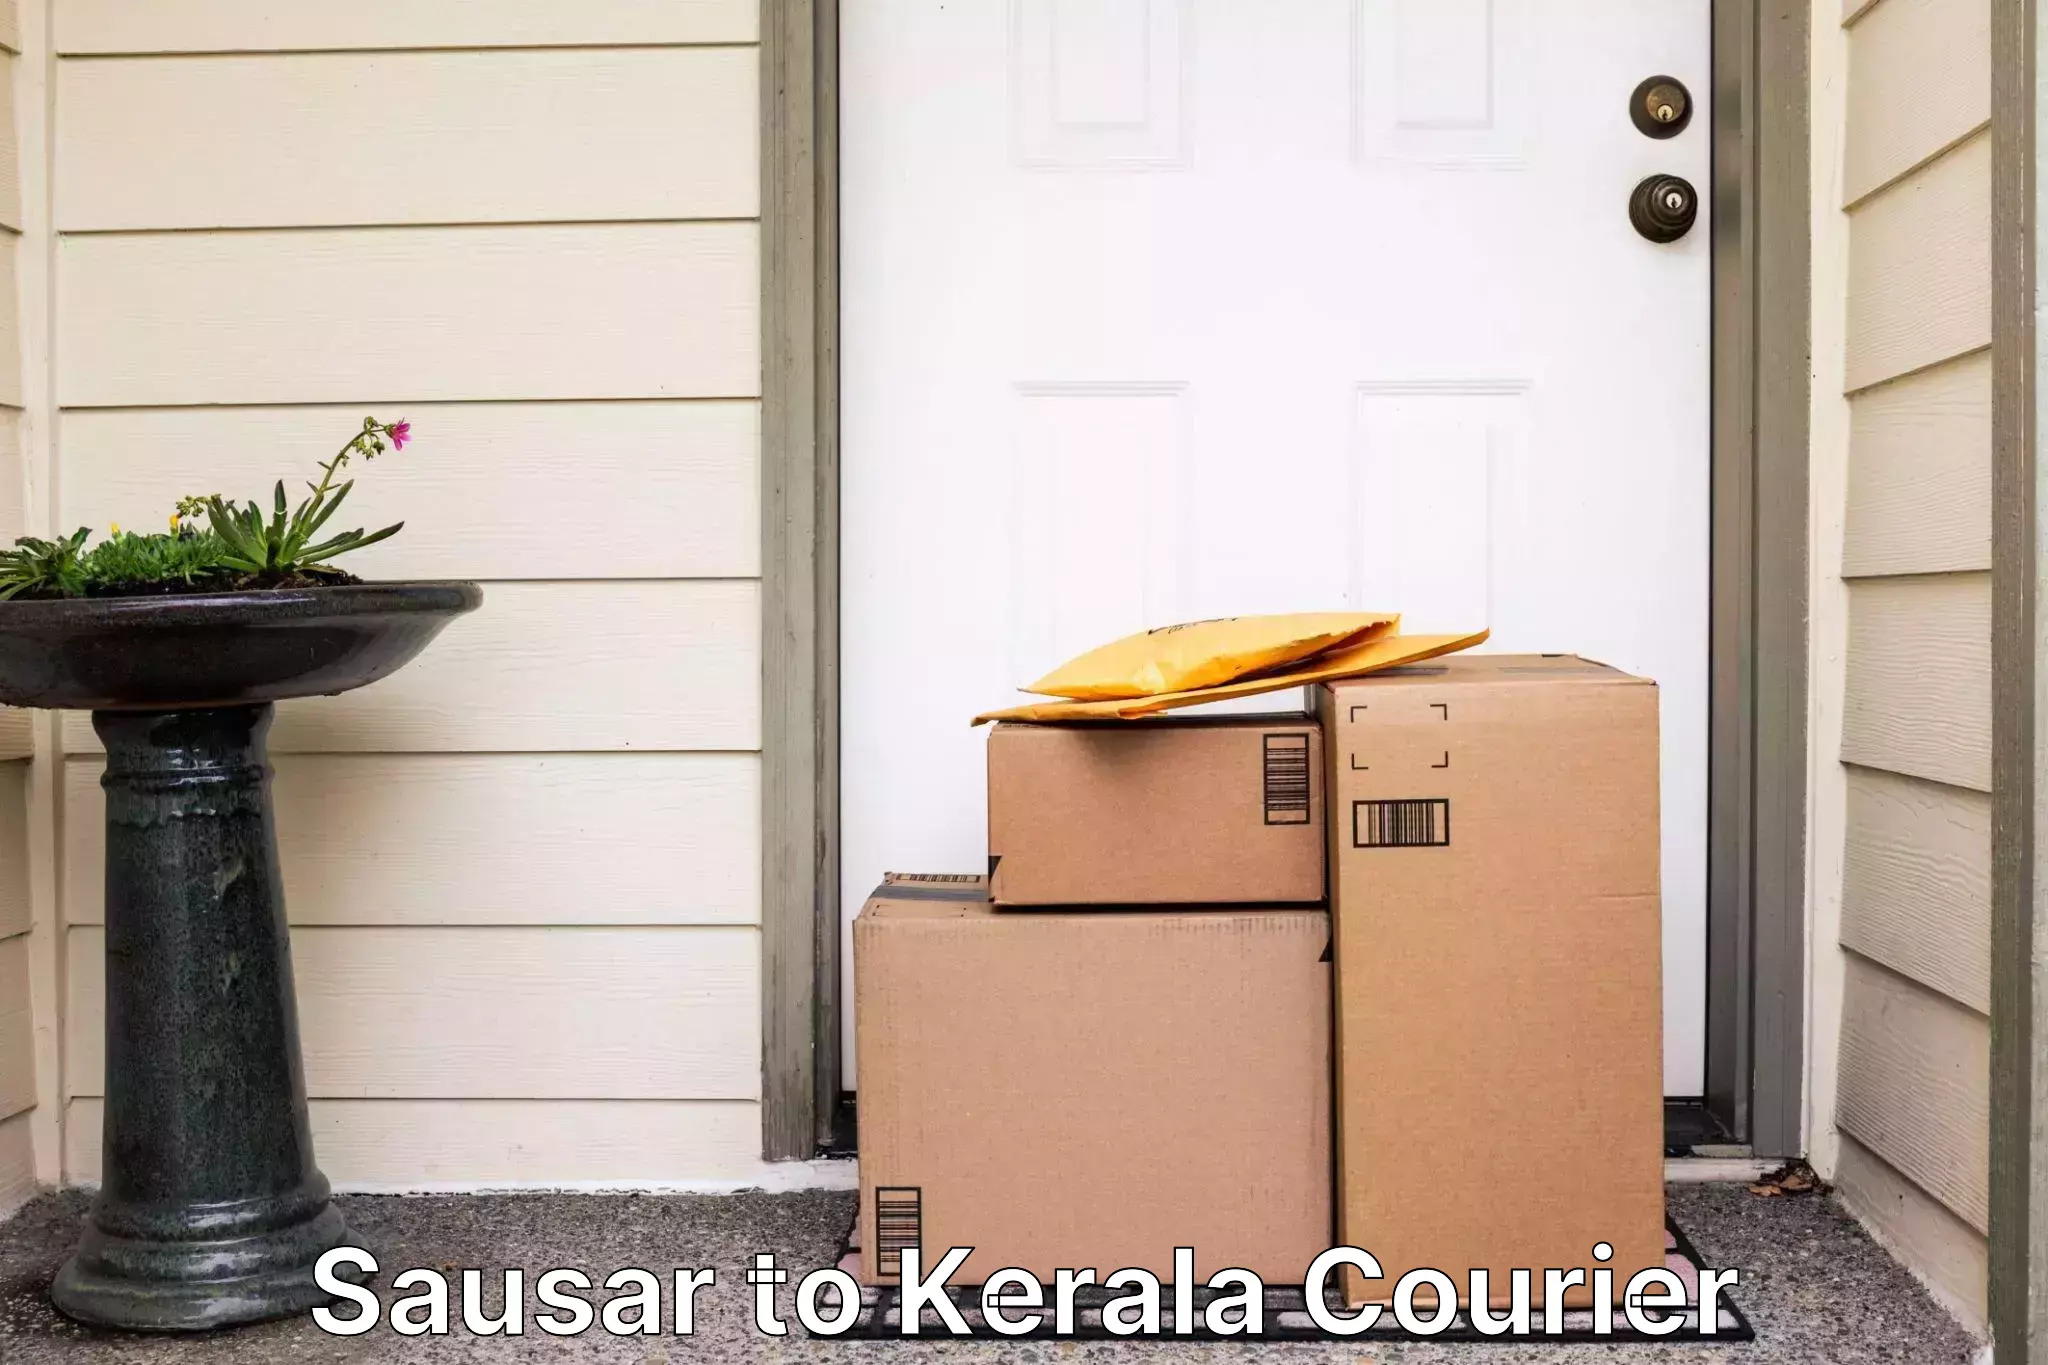 Automated luggage transport Sausar to Kerala